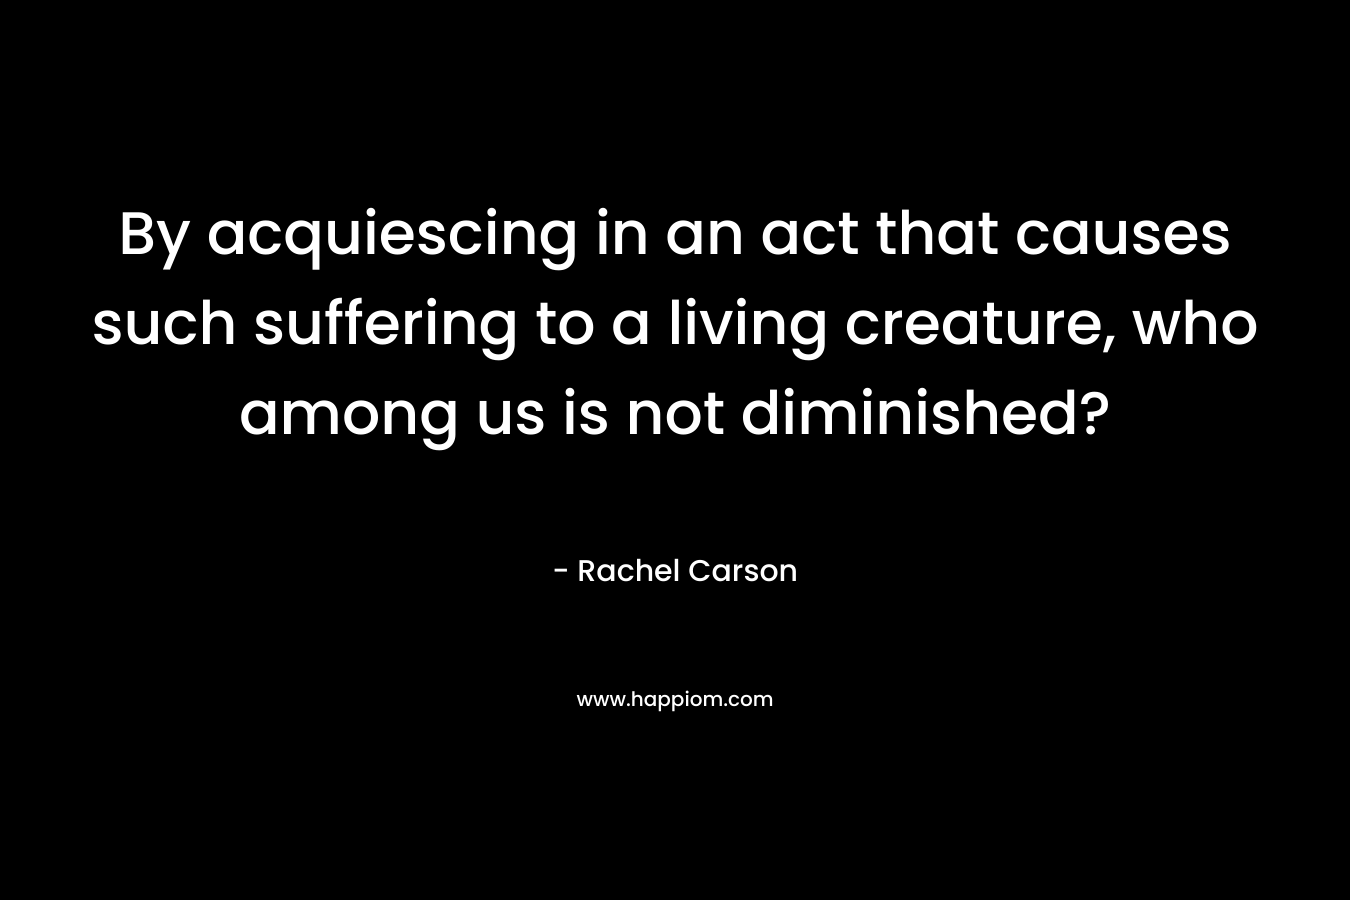 By acquiescing in an act that causes such suffering to a living creature, who among us is not diminished? – Rachel Carson